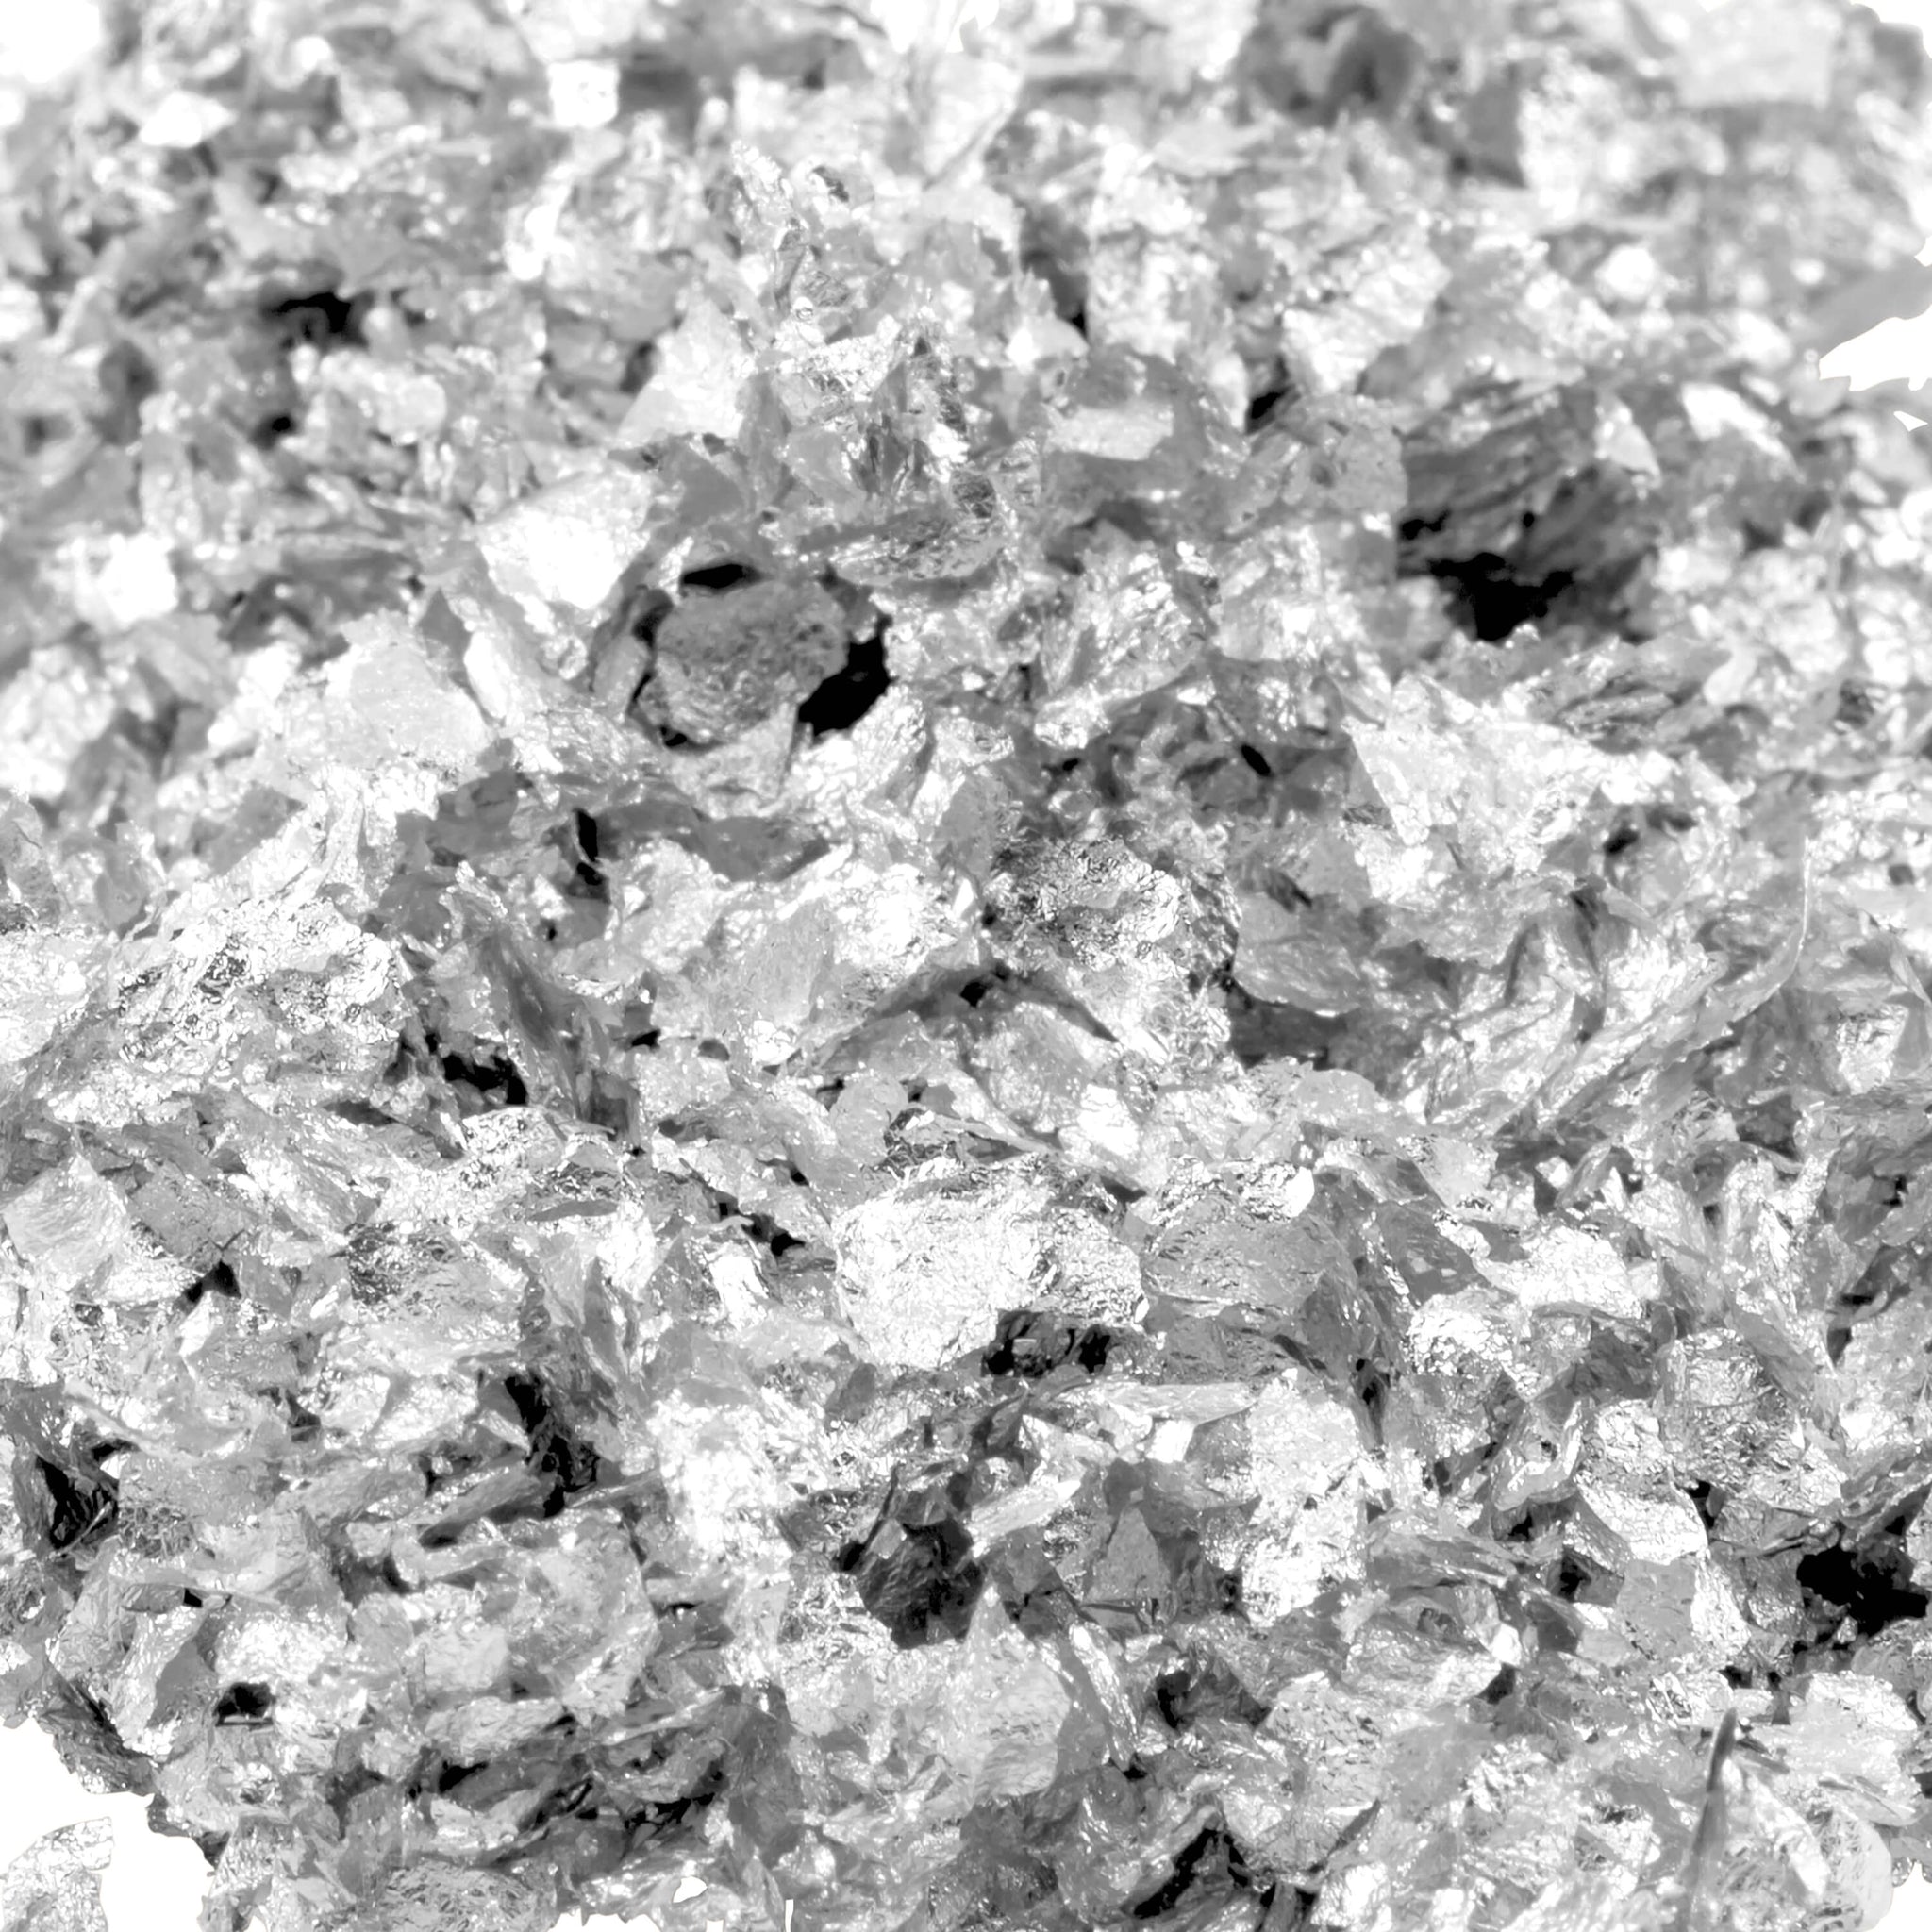 EDIBLE SILVER FLAKES for Garnishing and Decoration